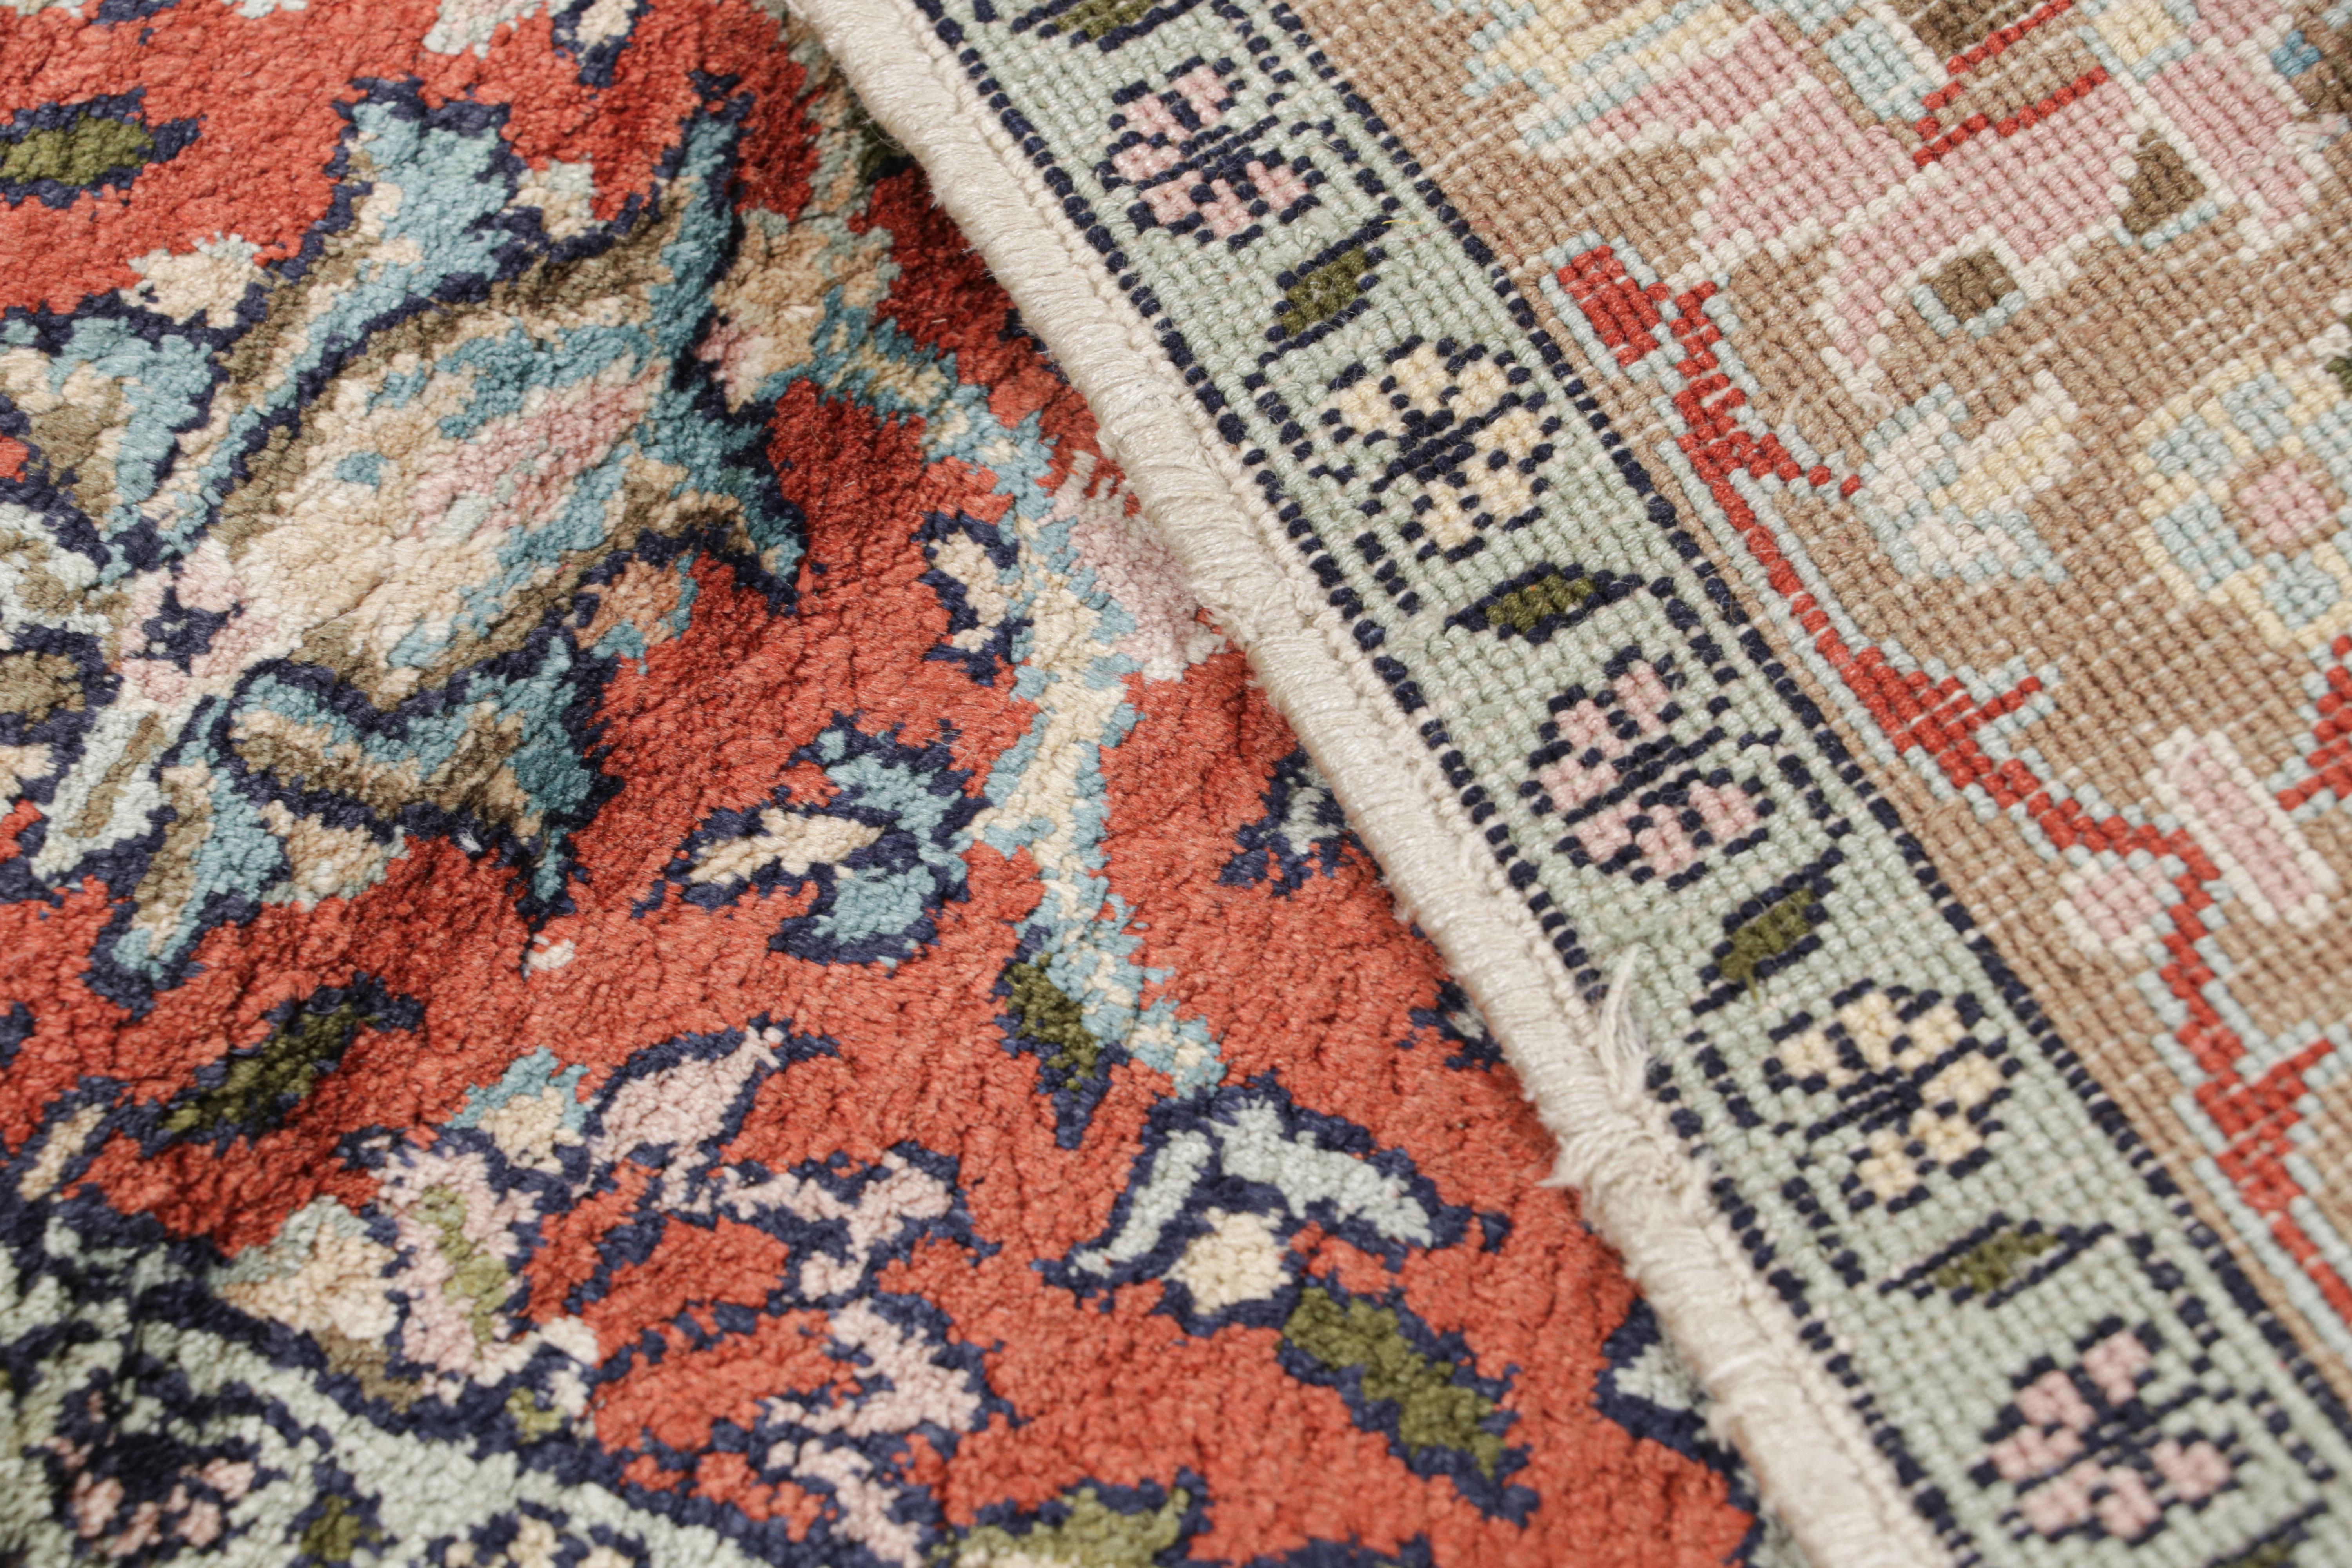 Contemporary Rug & Kilim’s Persian style Rug in Beige with Floral Pictorial Patterns